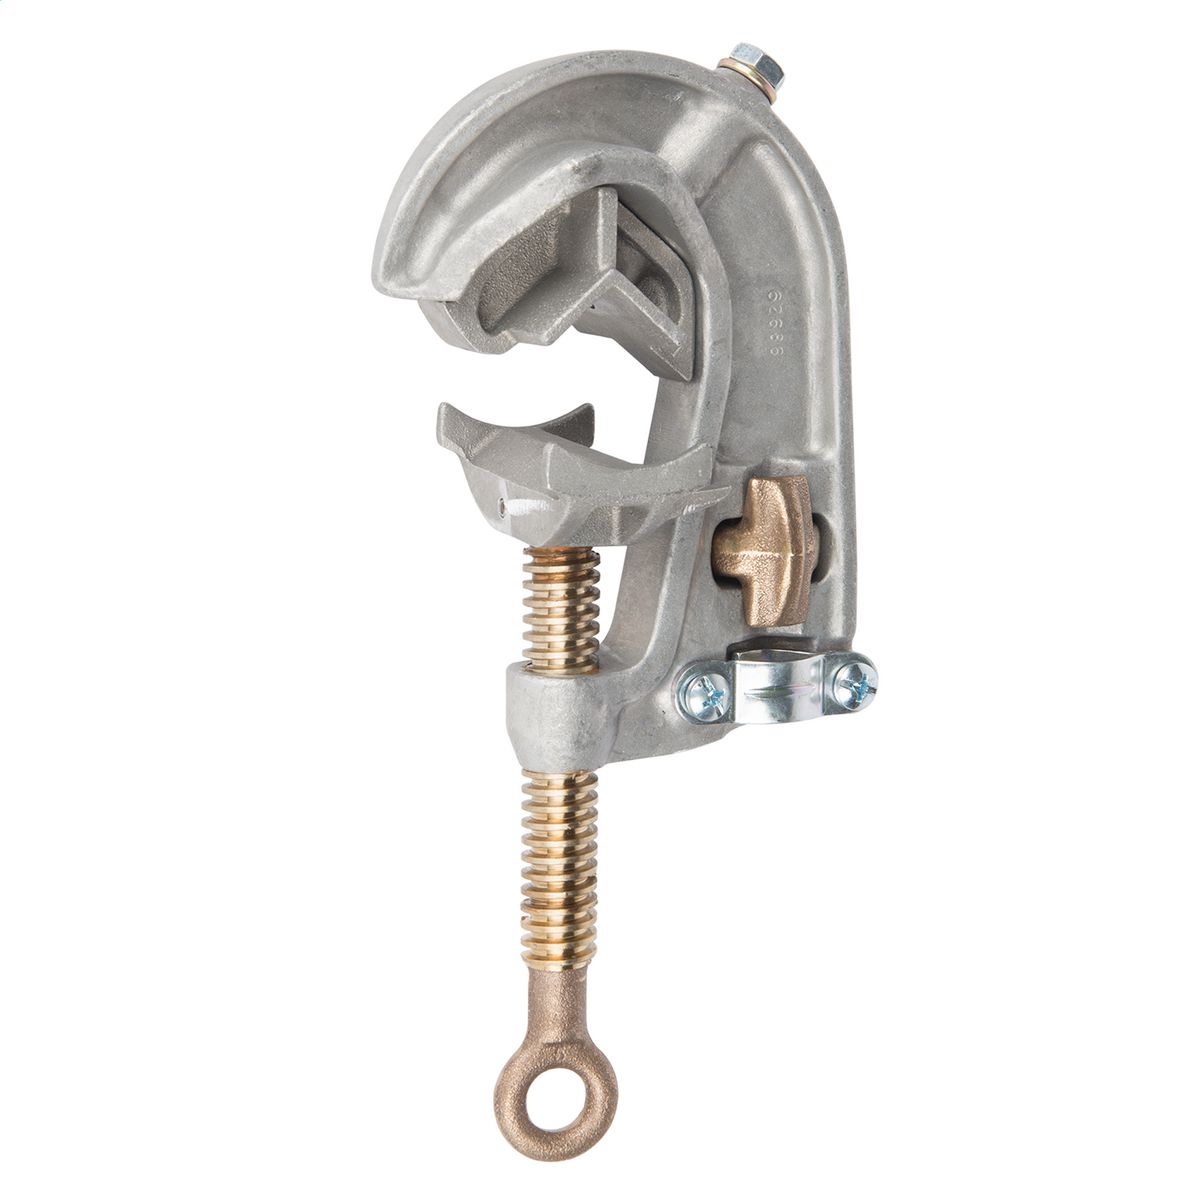 Ground Clamp - C-Type I-A-5 2.5" Jaw Opening | "C" Clamp | Clamps